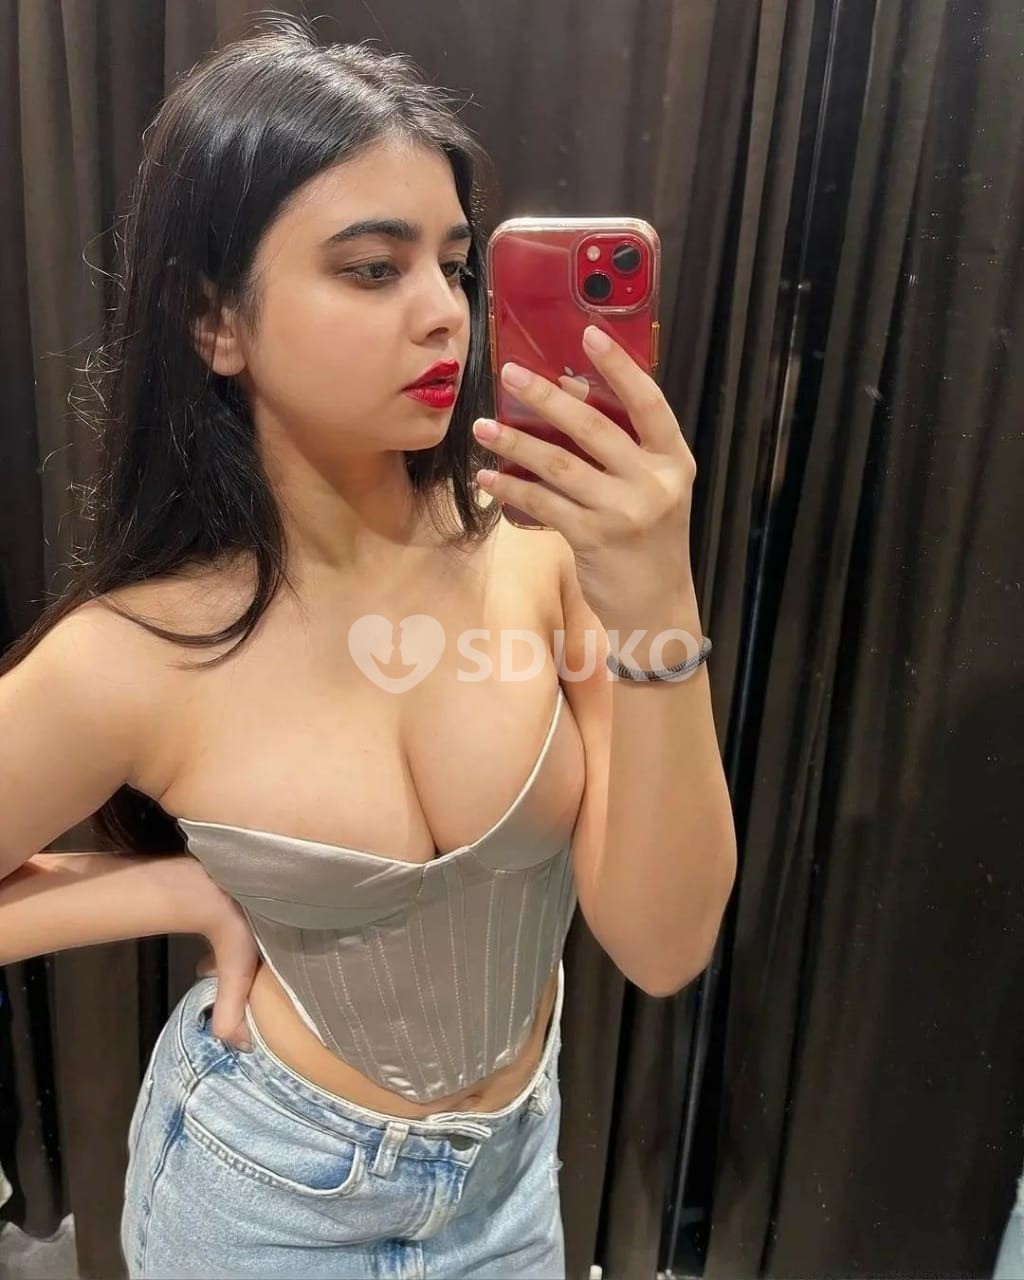 CHENNAI ALL AREA VIP;/ TODAY LOW PRICE ESCORT 🥰SERVICE 100% SAFE AND SECURE ANYTIME CALL ME 24 X 7 SERVICE AVAILABLE 